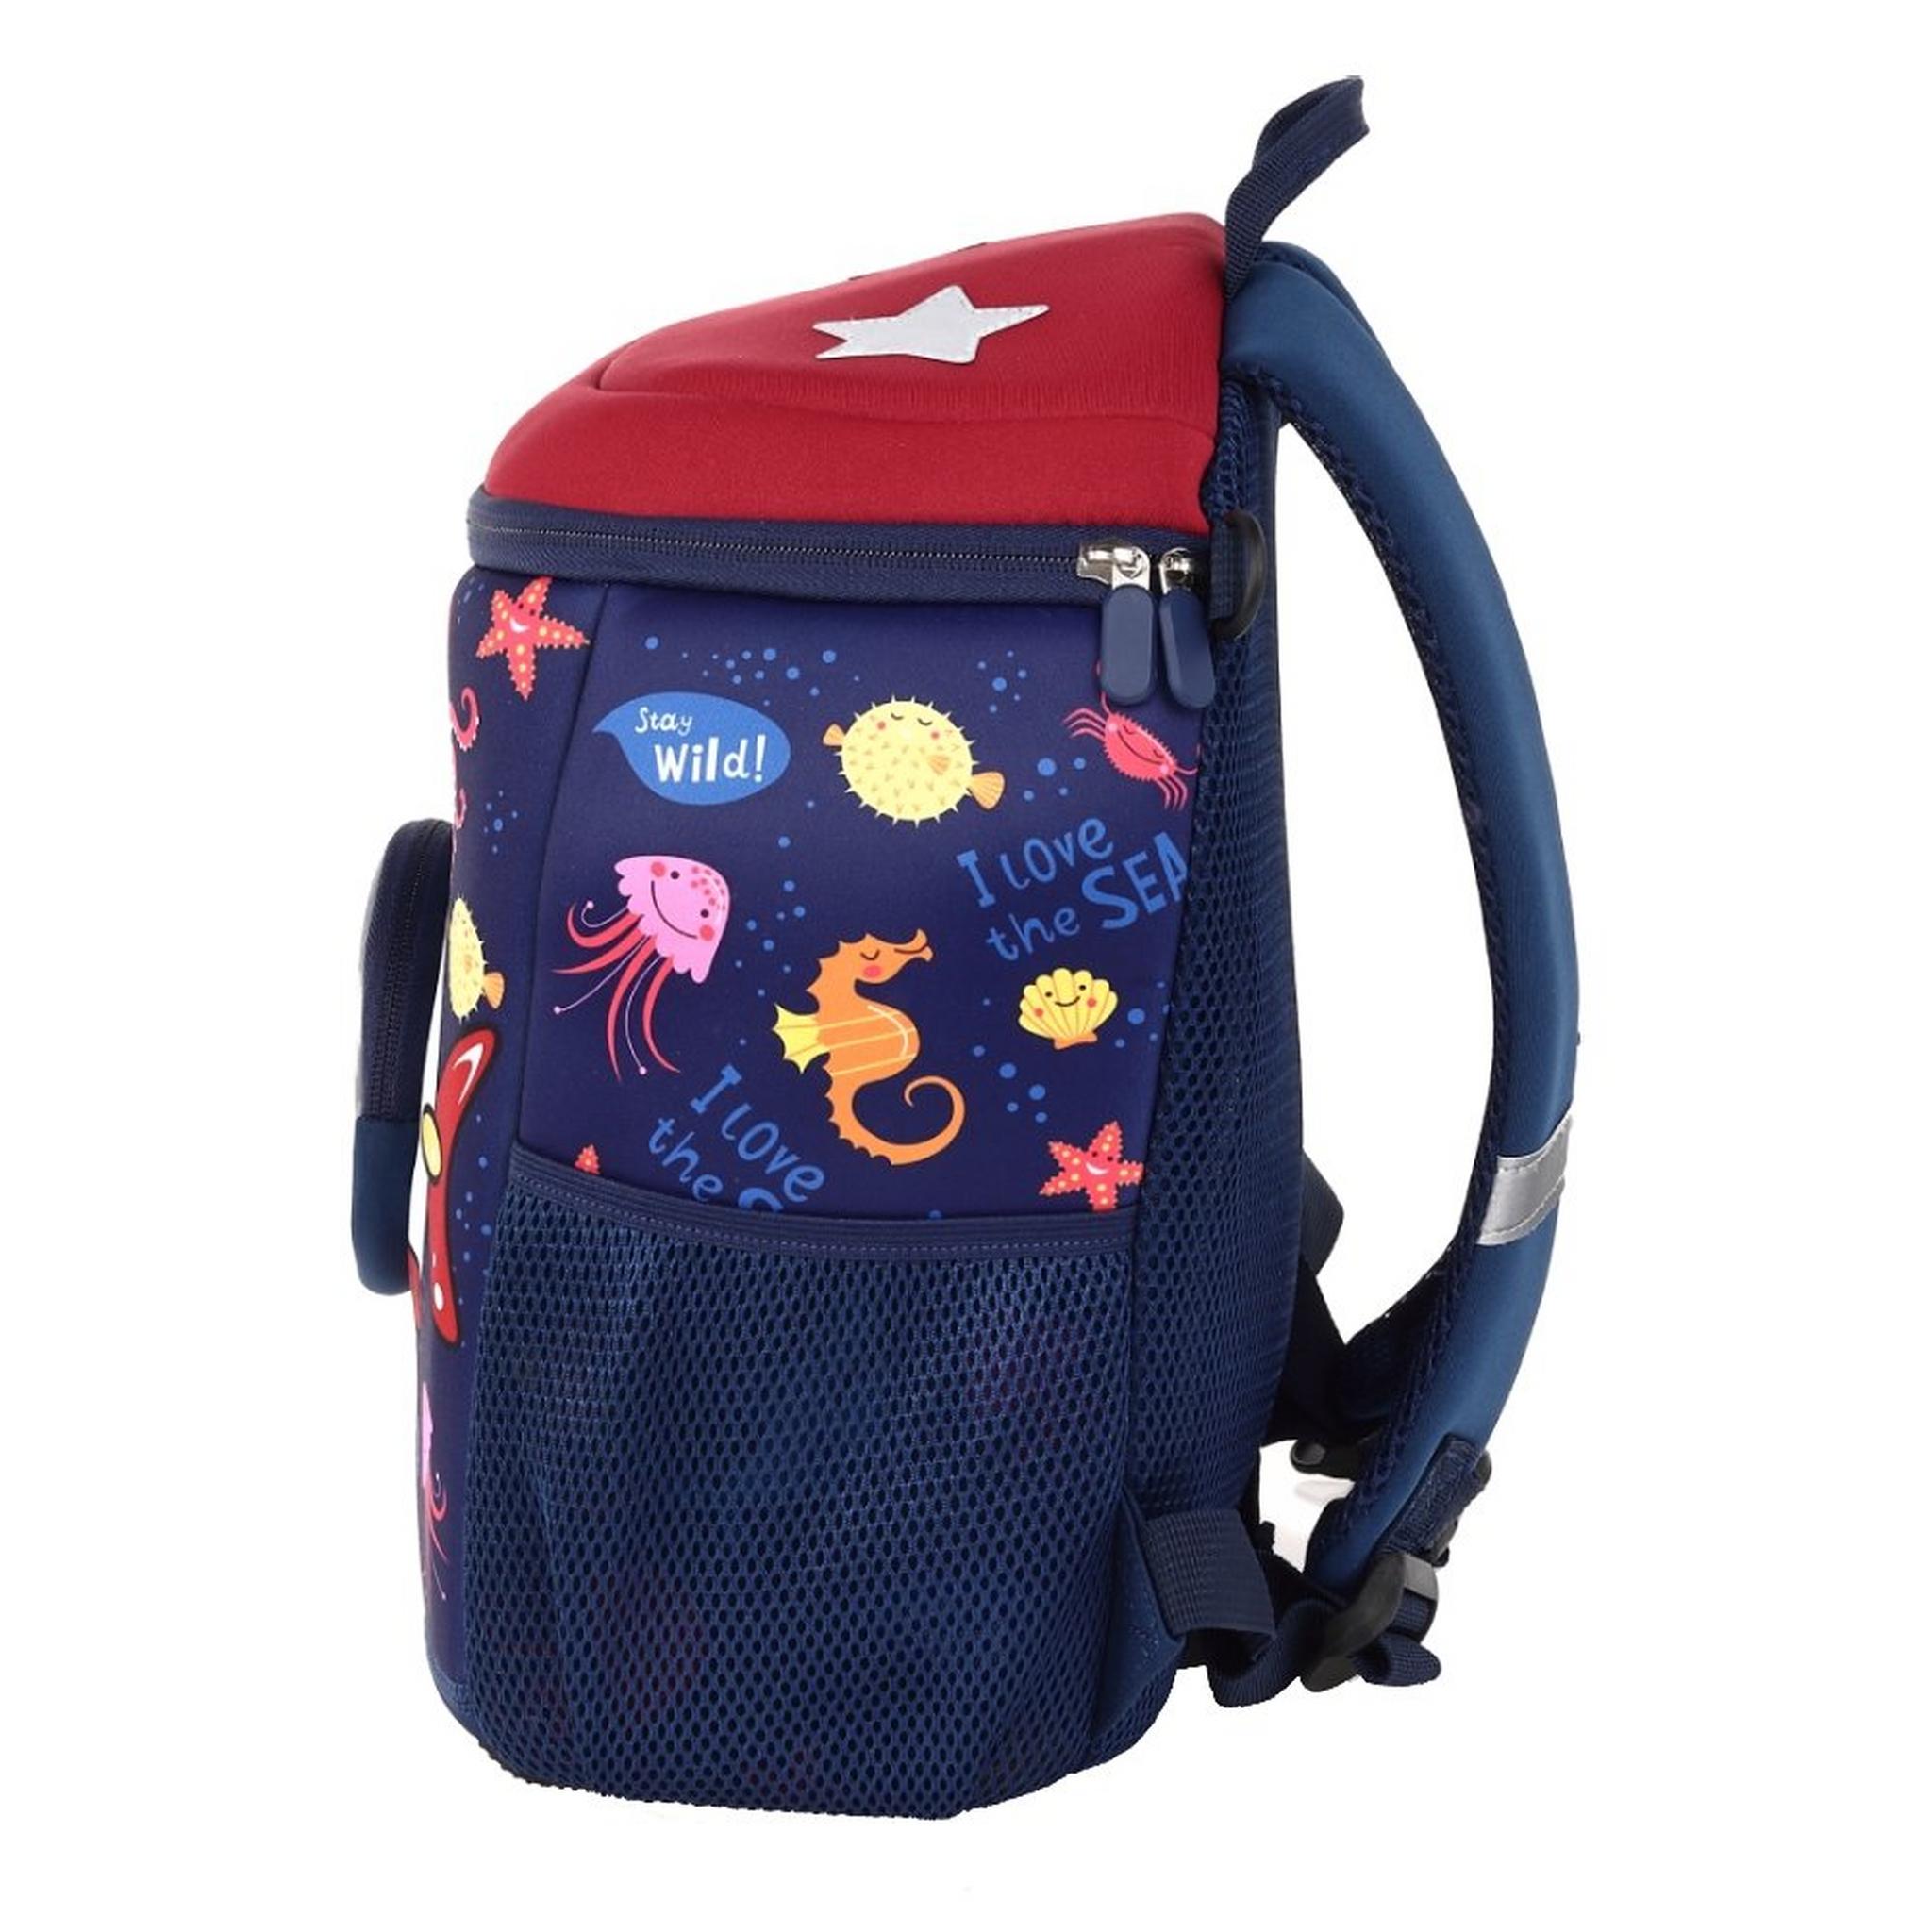 EQ Kids 3in1 Sea Large Backpack - Blue/Red